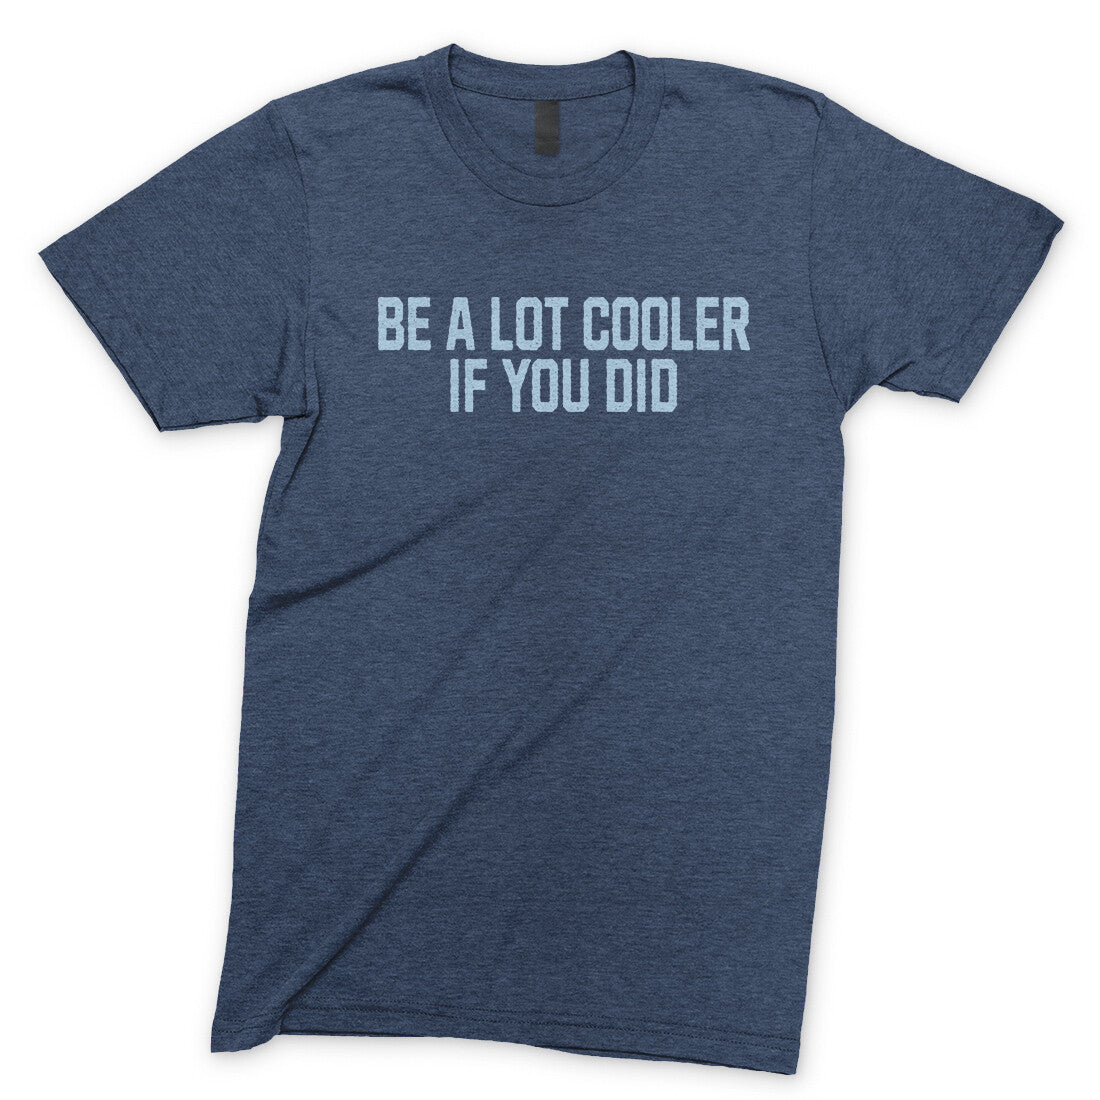 Be a Lot Cooler if you Did in Navy Heather Color